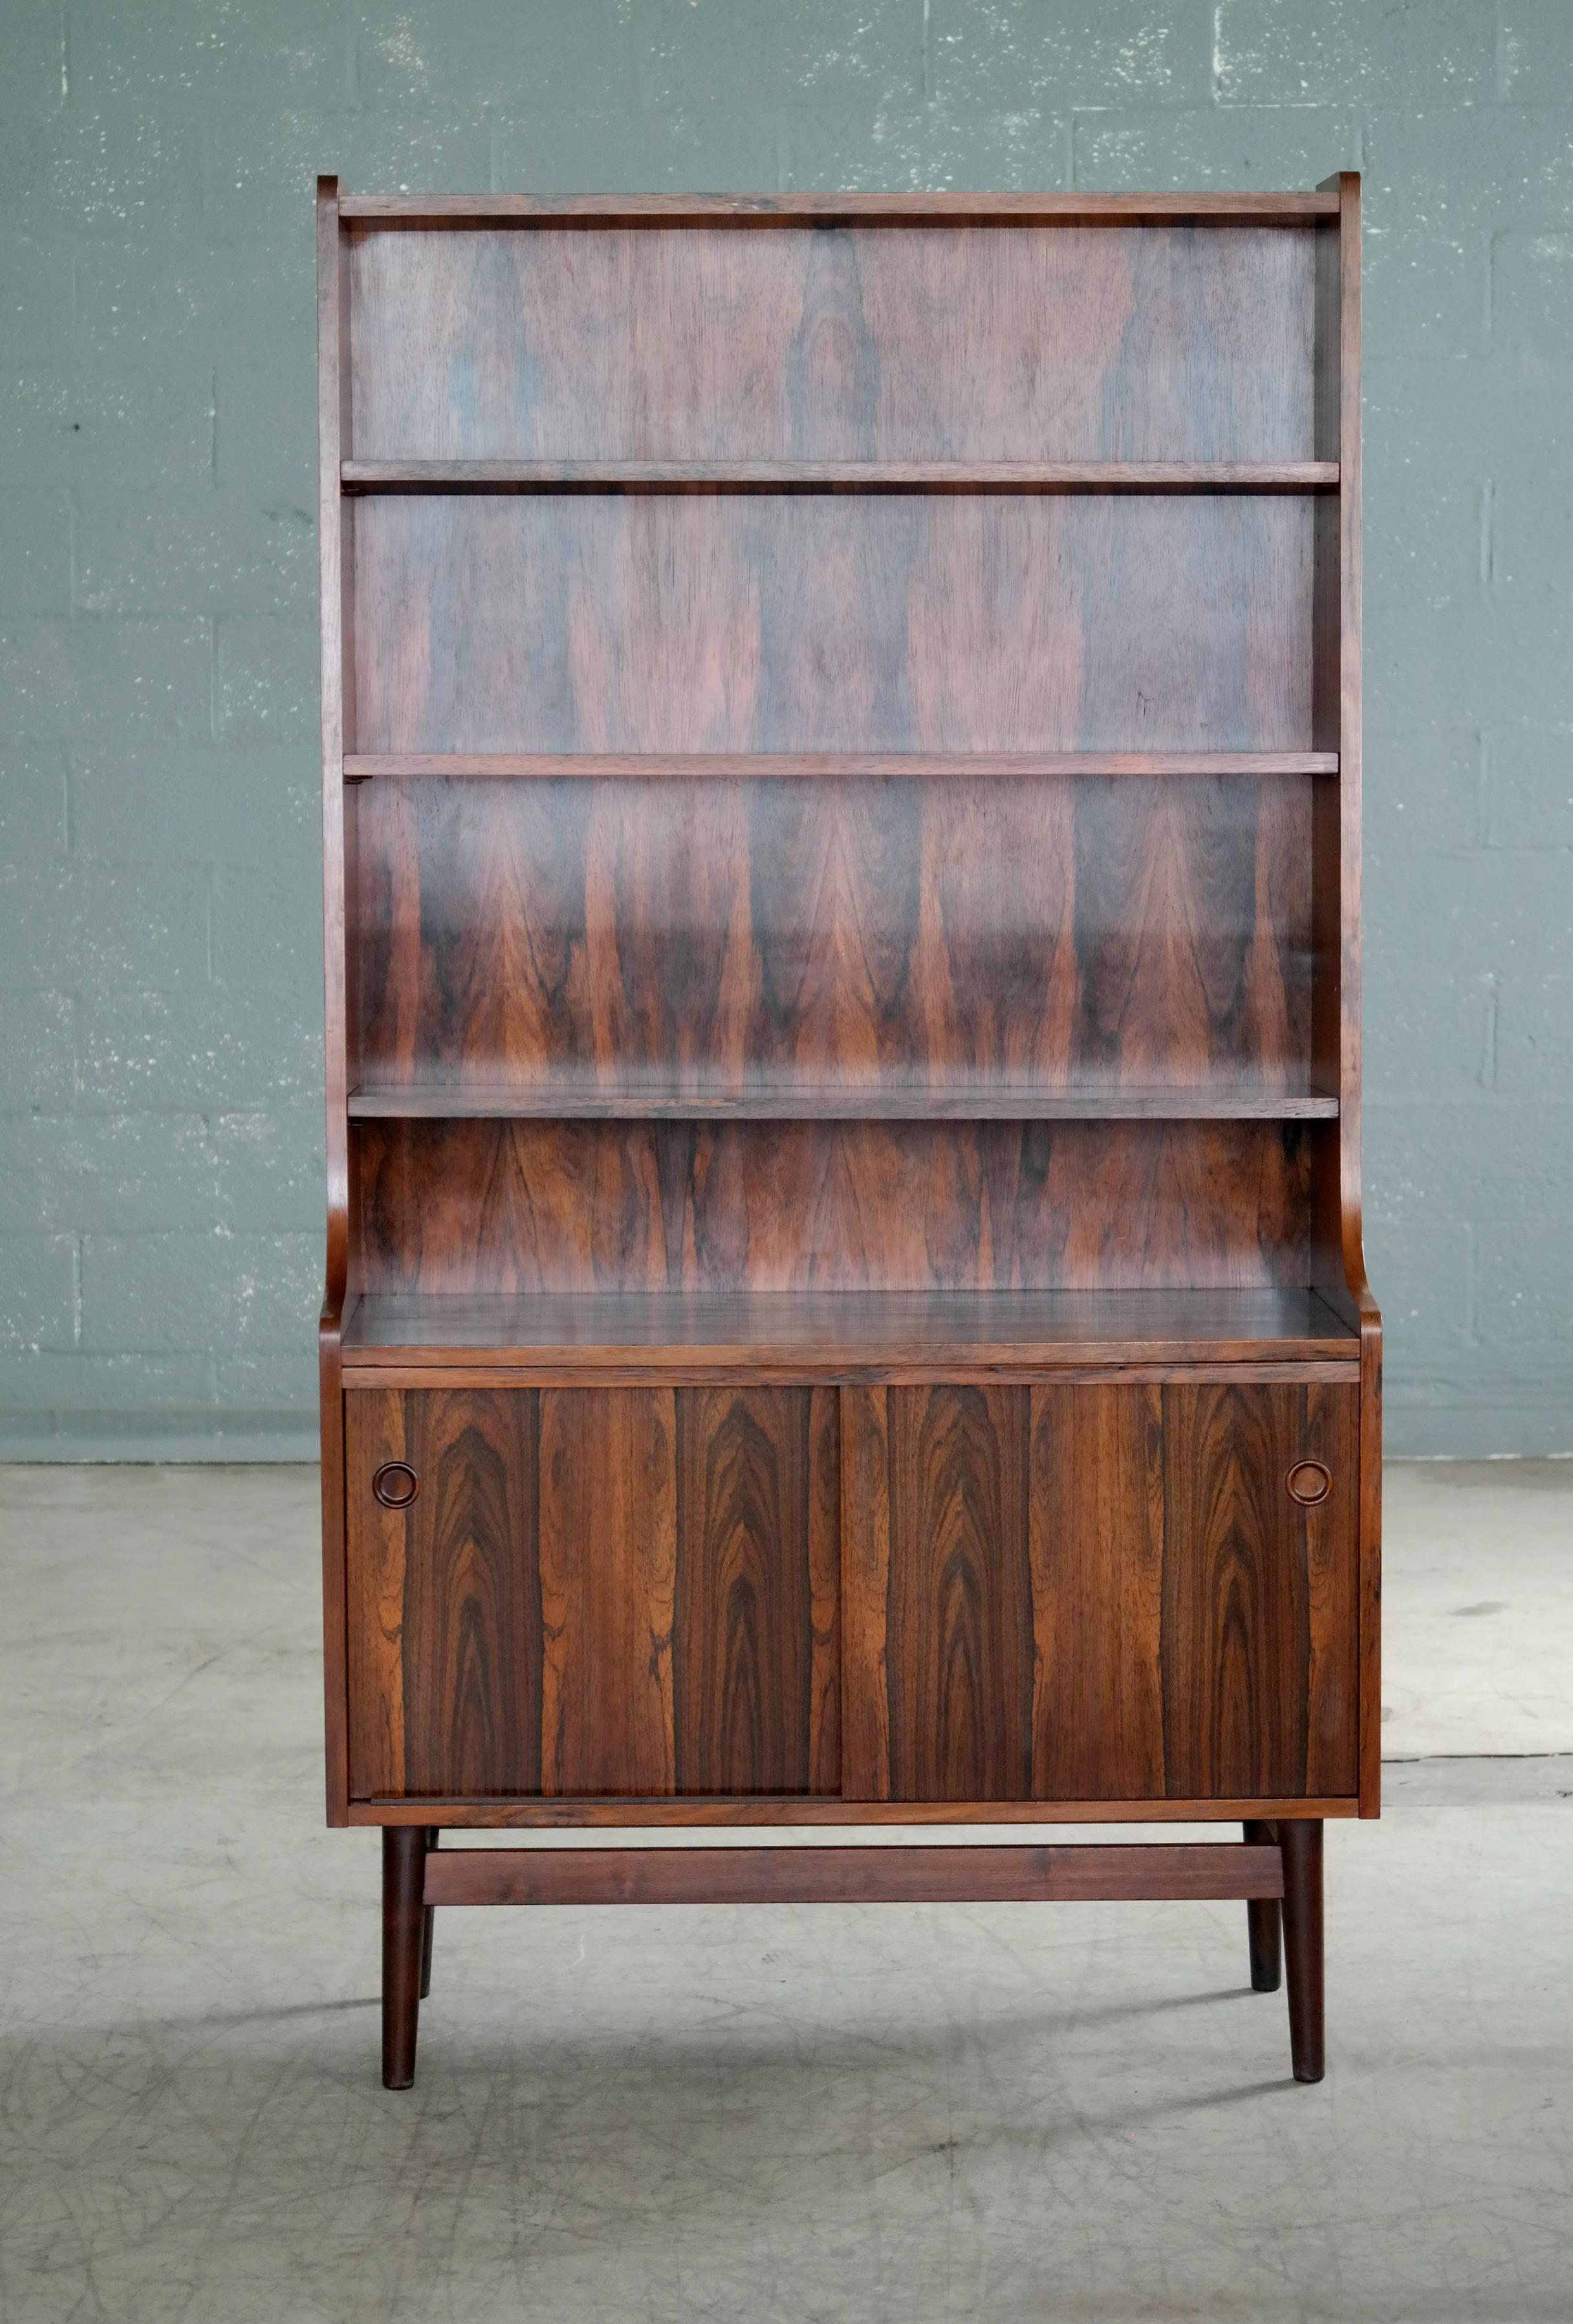 Beautiful and elegant bookcase in bookmatched rosewood with beautiful deep and dark rosewood color and rich grain. Designed by Johannes Sorth for Bornholm's Mobler also known as Nexoe Teak. Very versatile with adjustable shelves and two storage